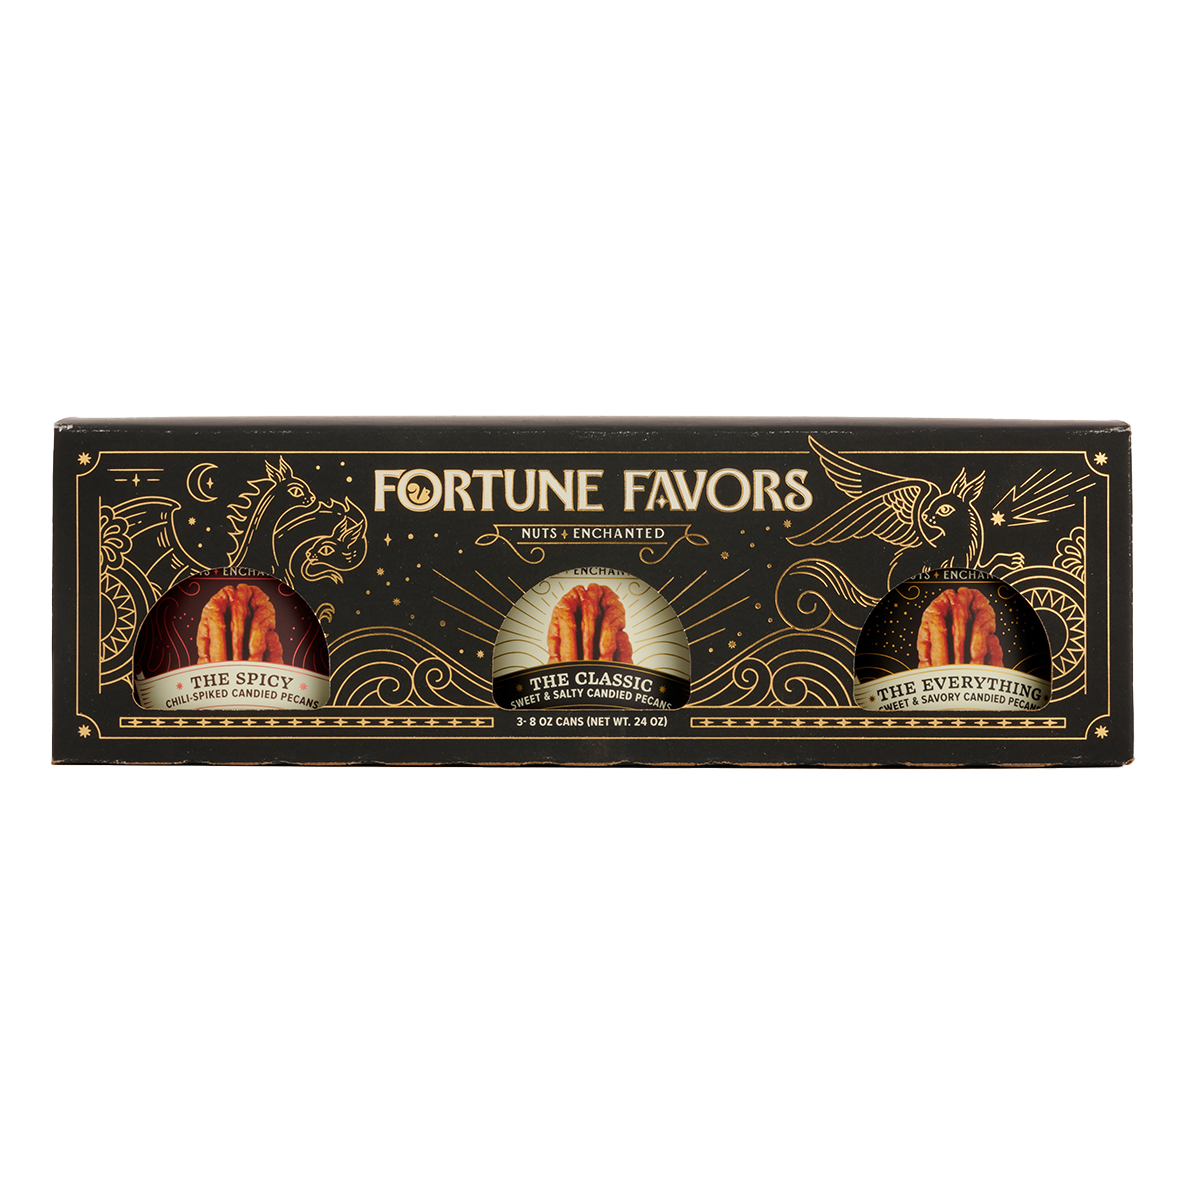 Black and gold sampler gift pack containing three 8 ounce cans of Fortune Favors candied pecans, one of each signature flavor.